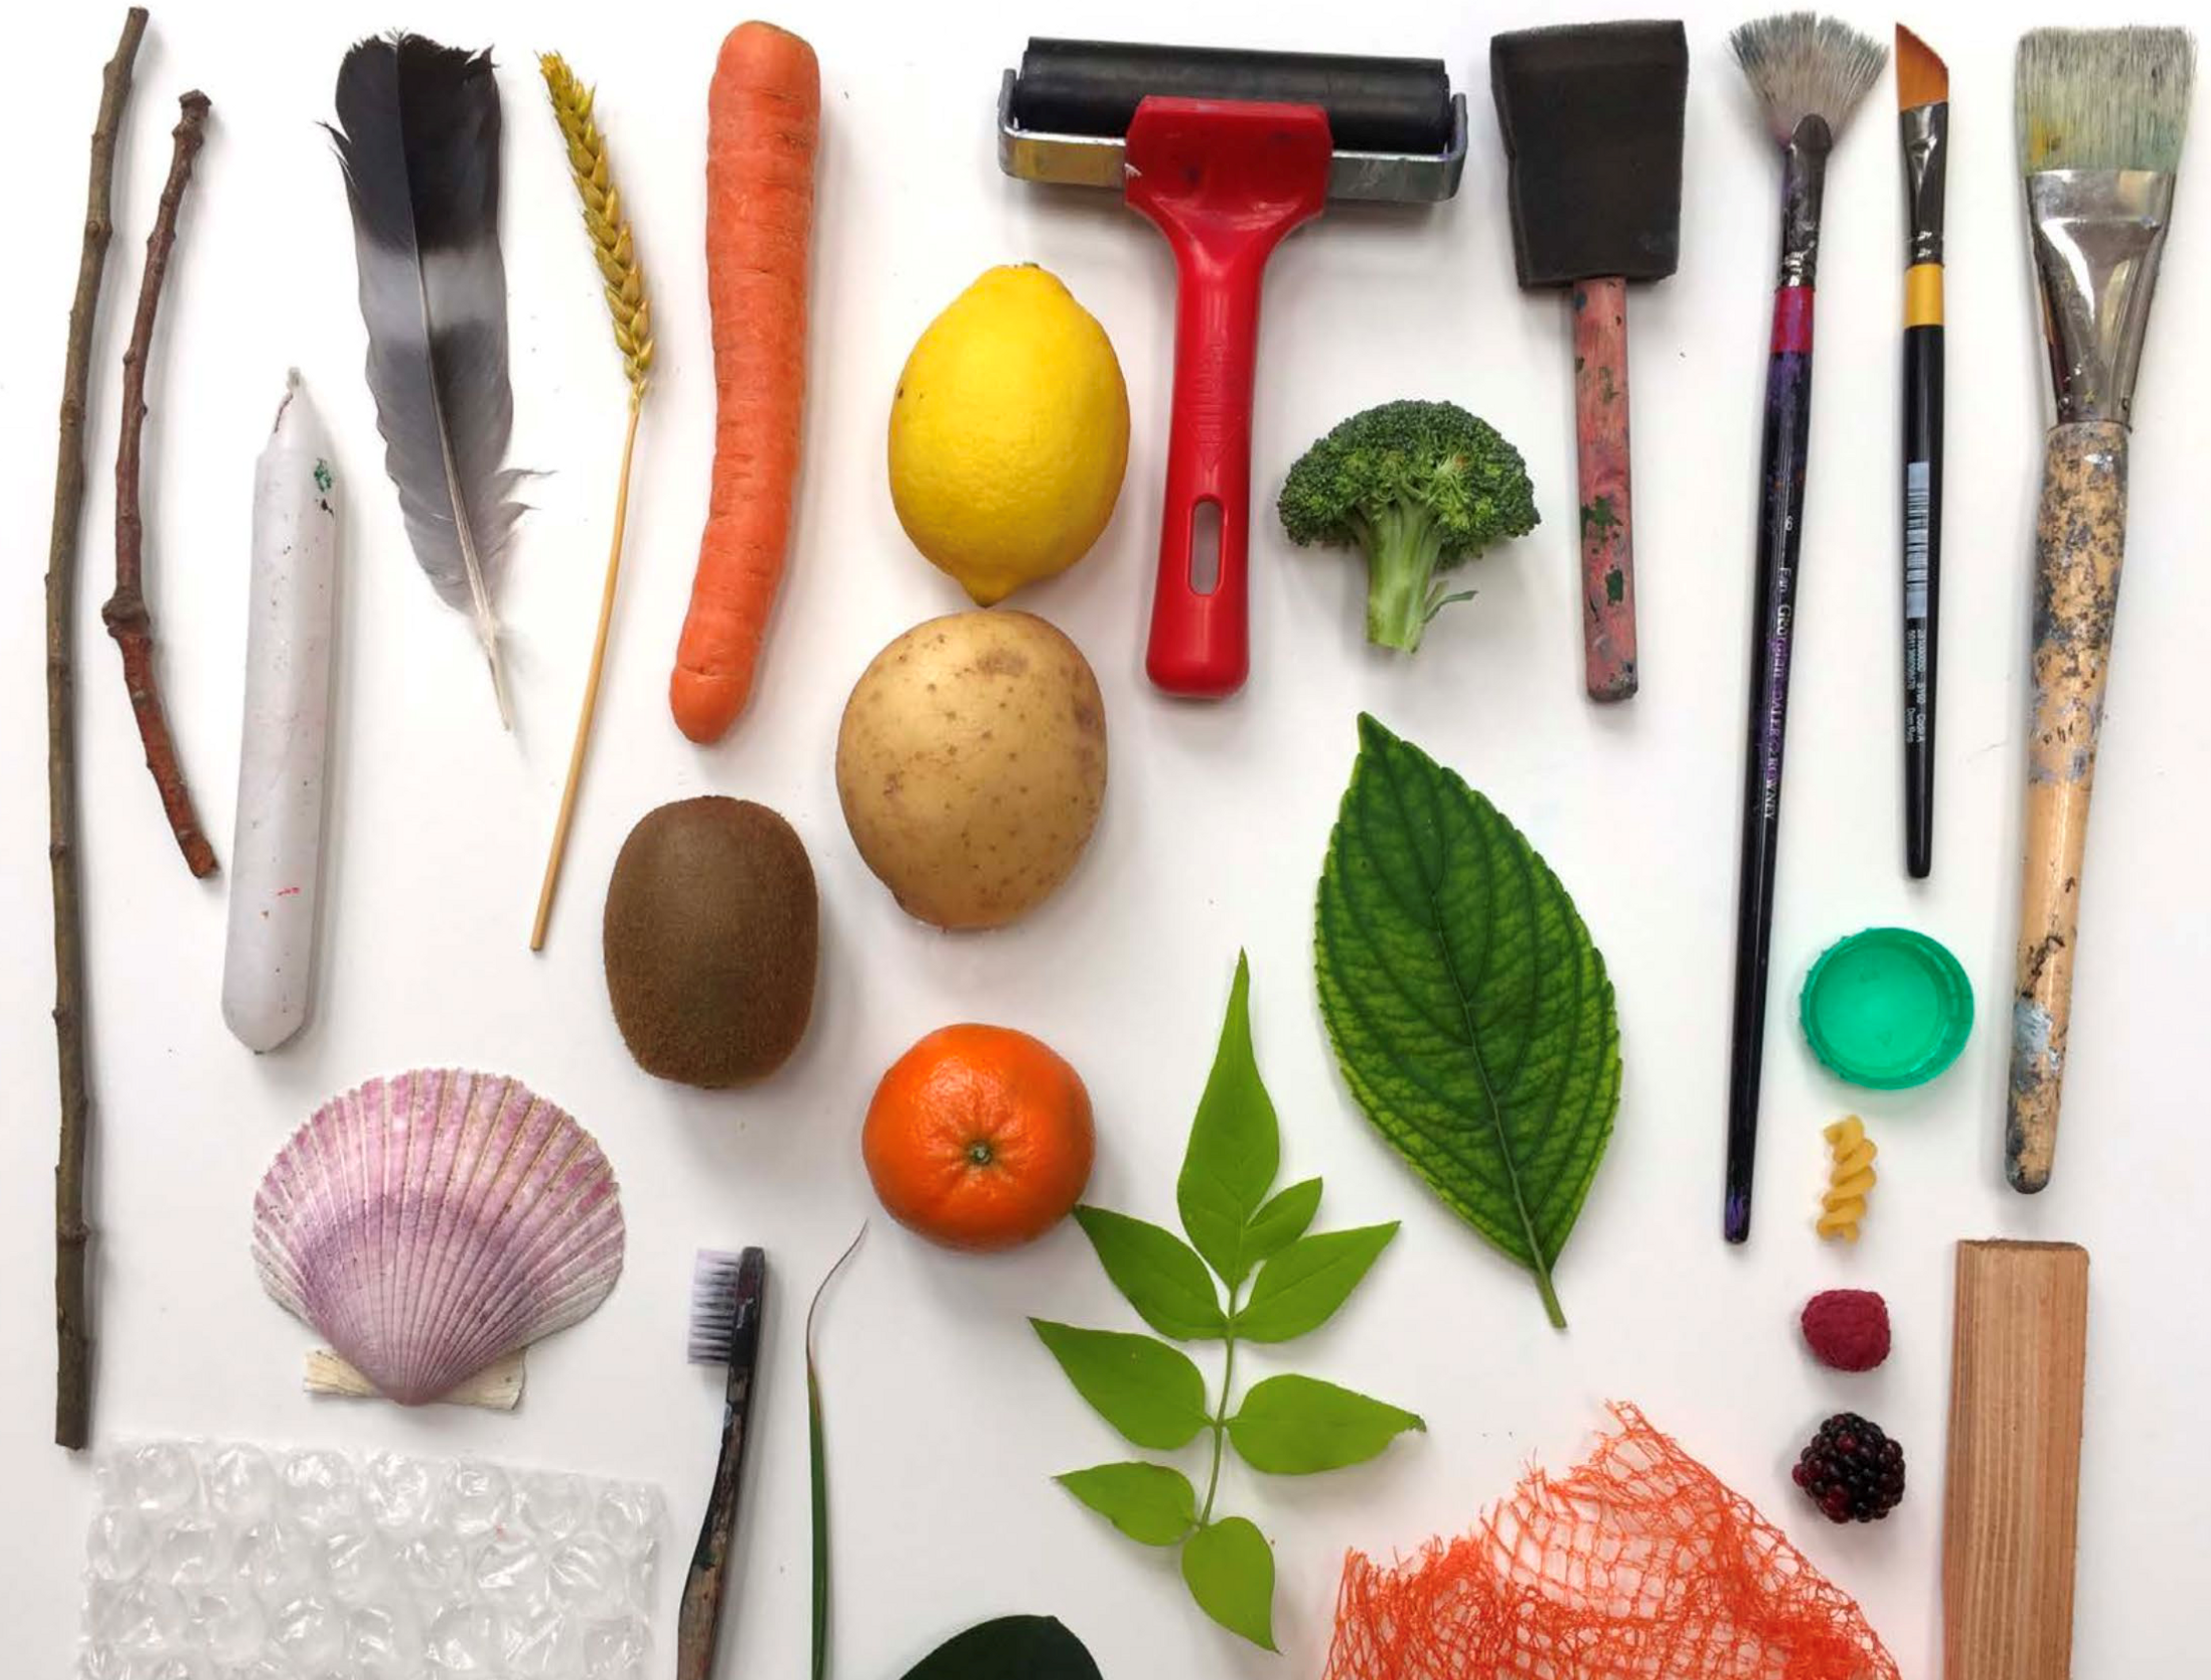 Photograph of a series of objects on a table including fruit, vegetables, shells, and paintbrushes